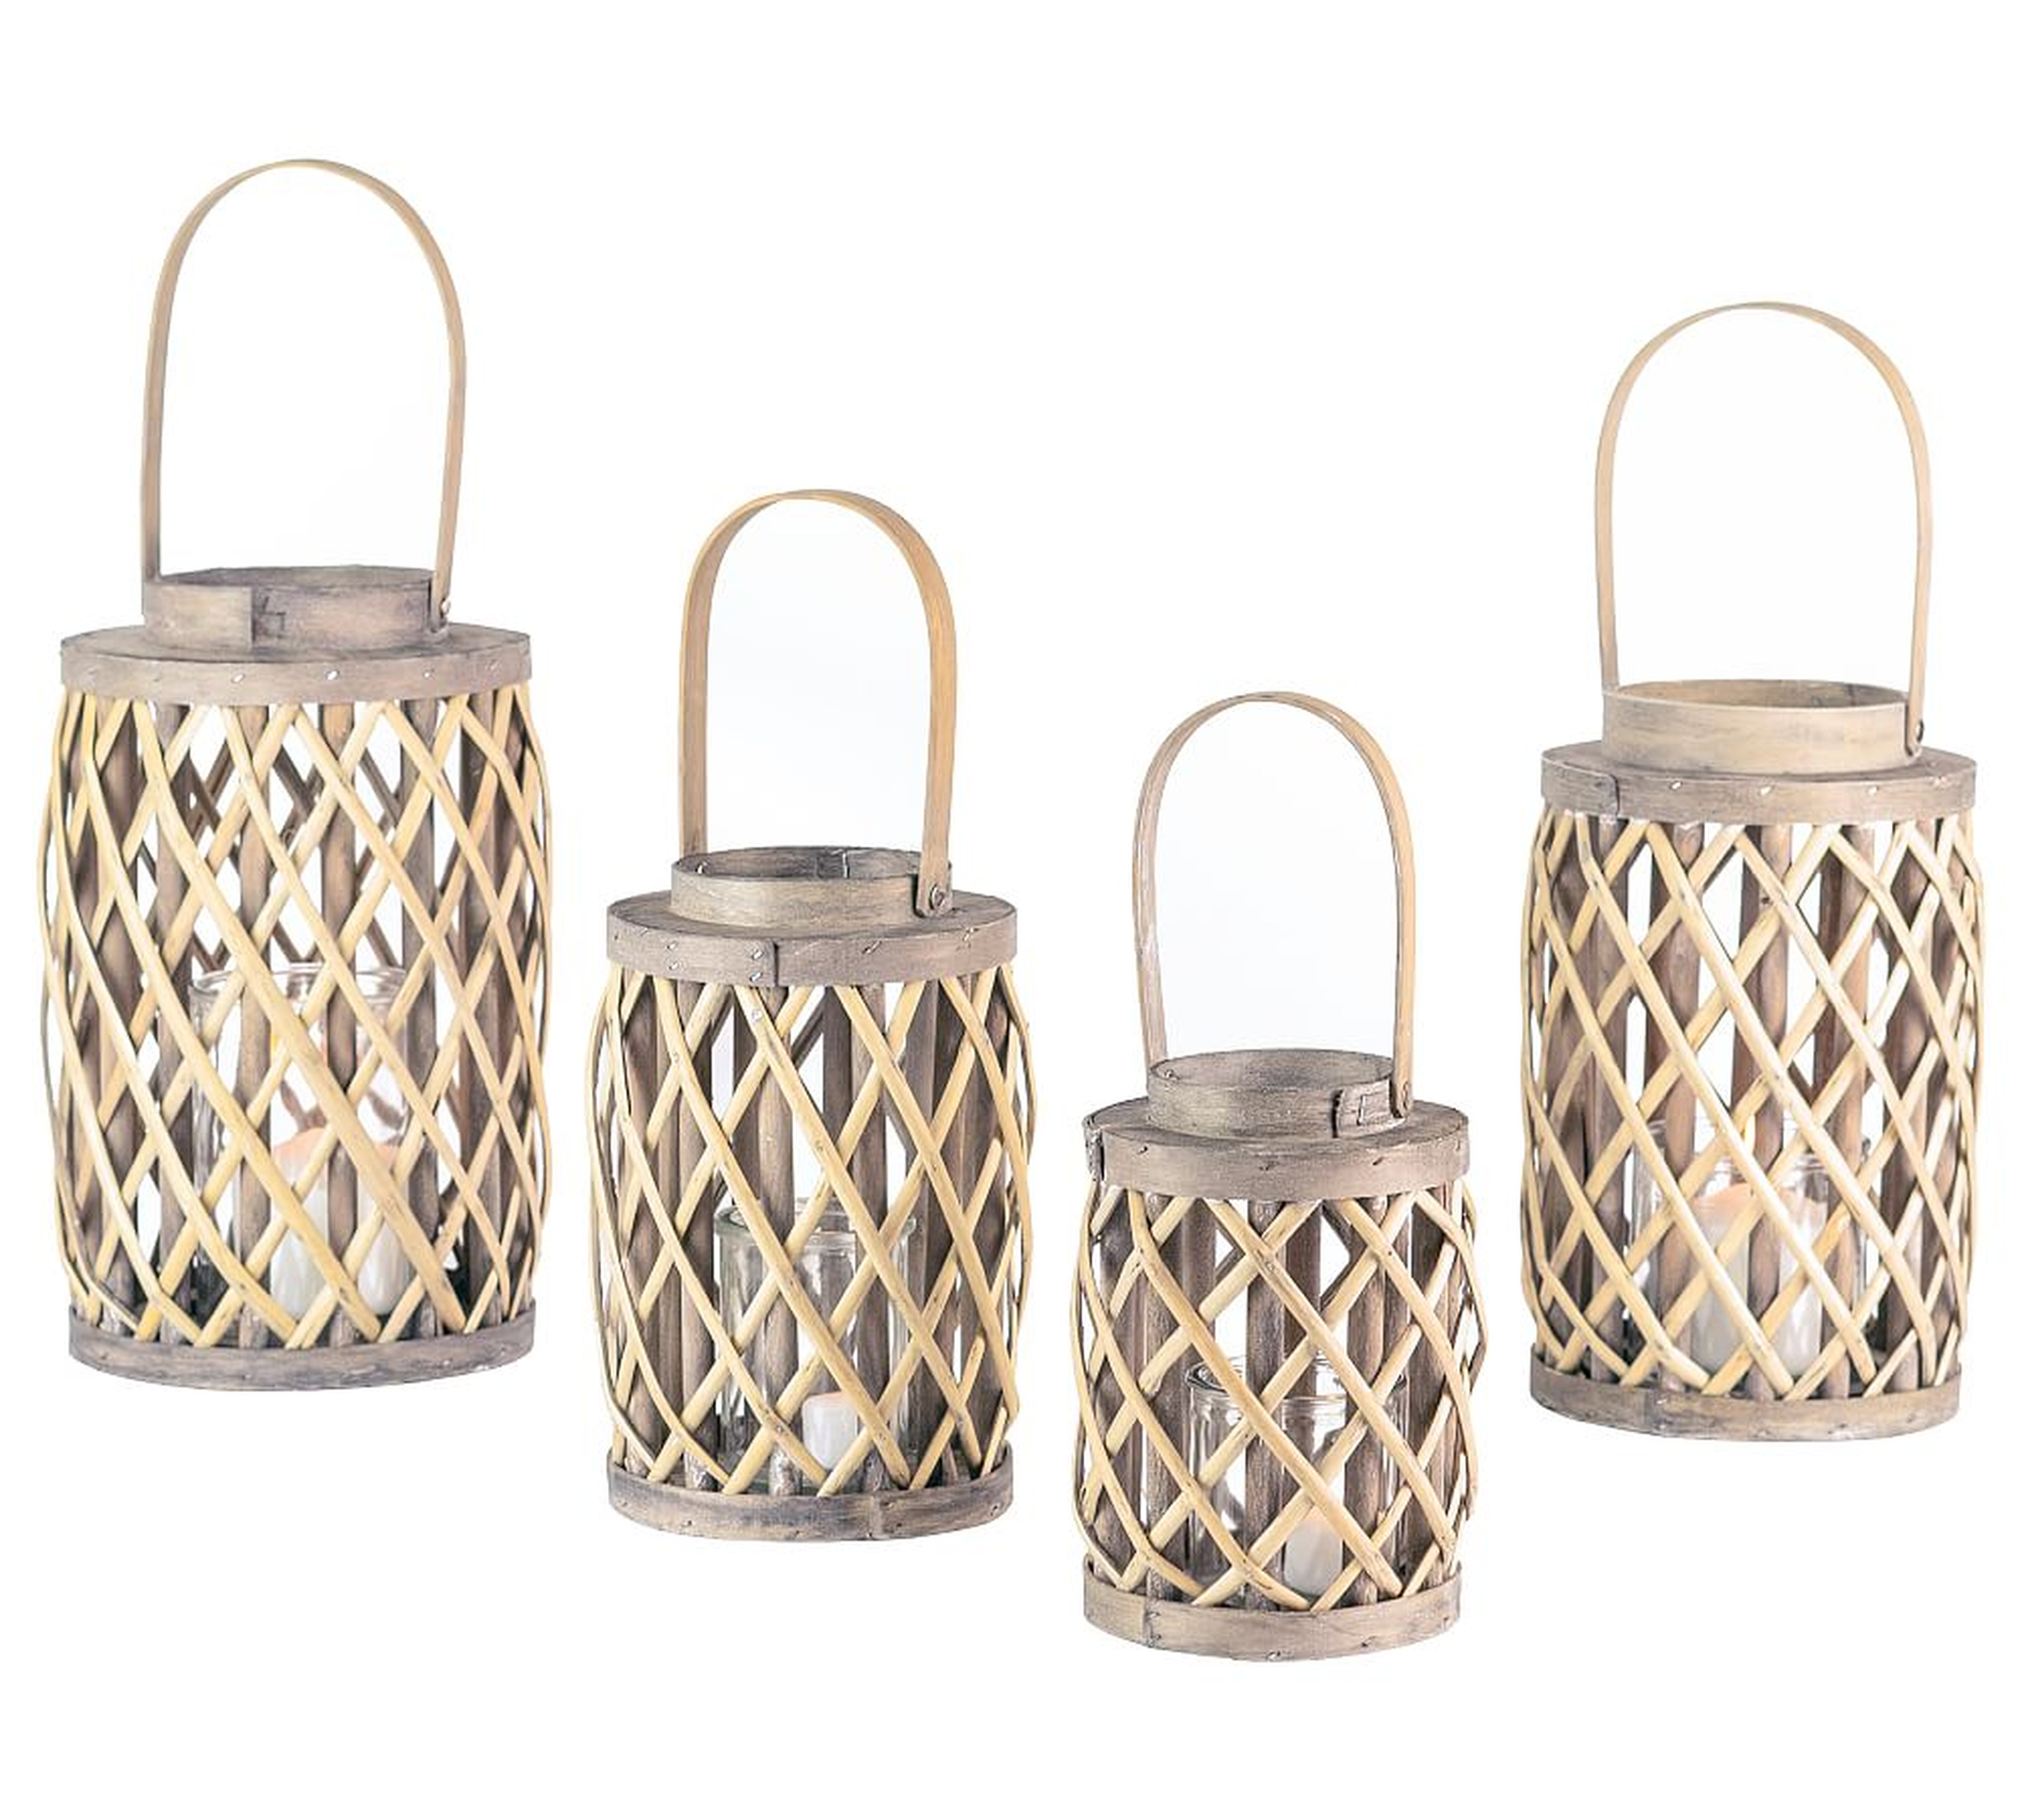 Grey Willow Lanterns With Glass Cylinder, Grey Wash Outdoor, Set of 4 - Pottery Barn